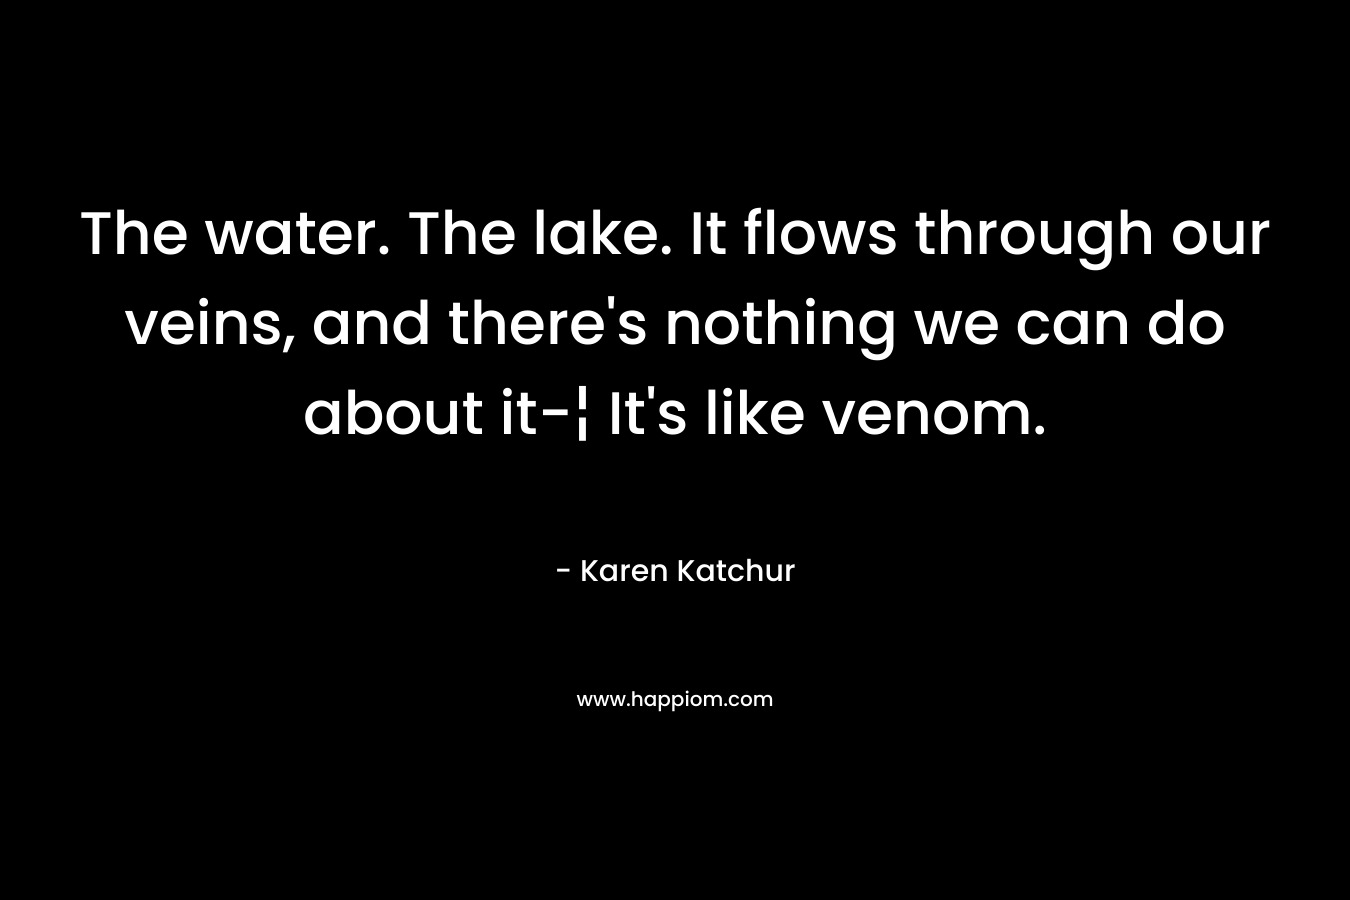 The water. The lake. It flows through our veins, and there’s nothing we can do about it-¦ It’s like venom. – Karen Katchur